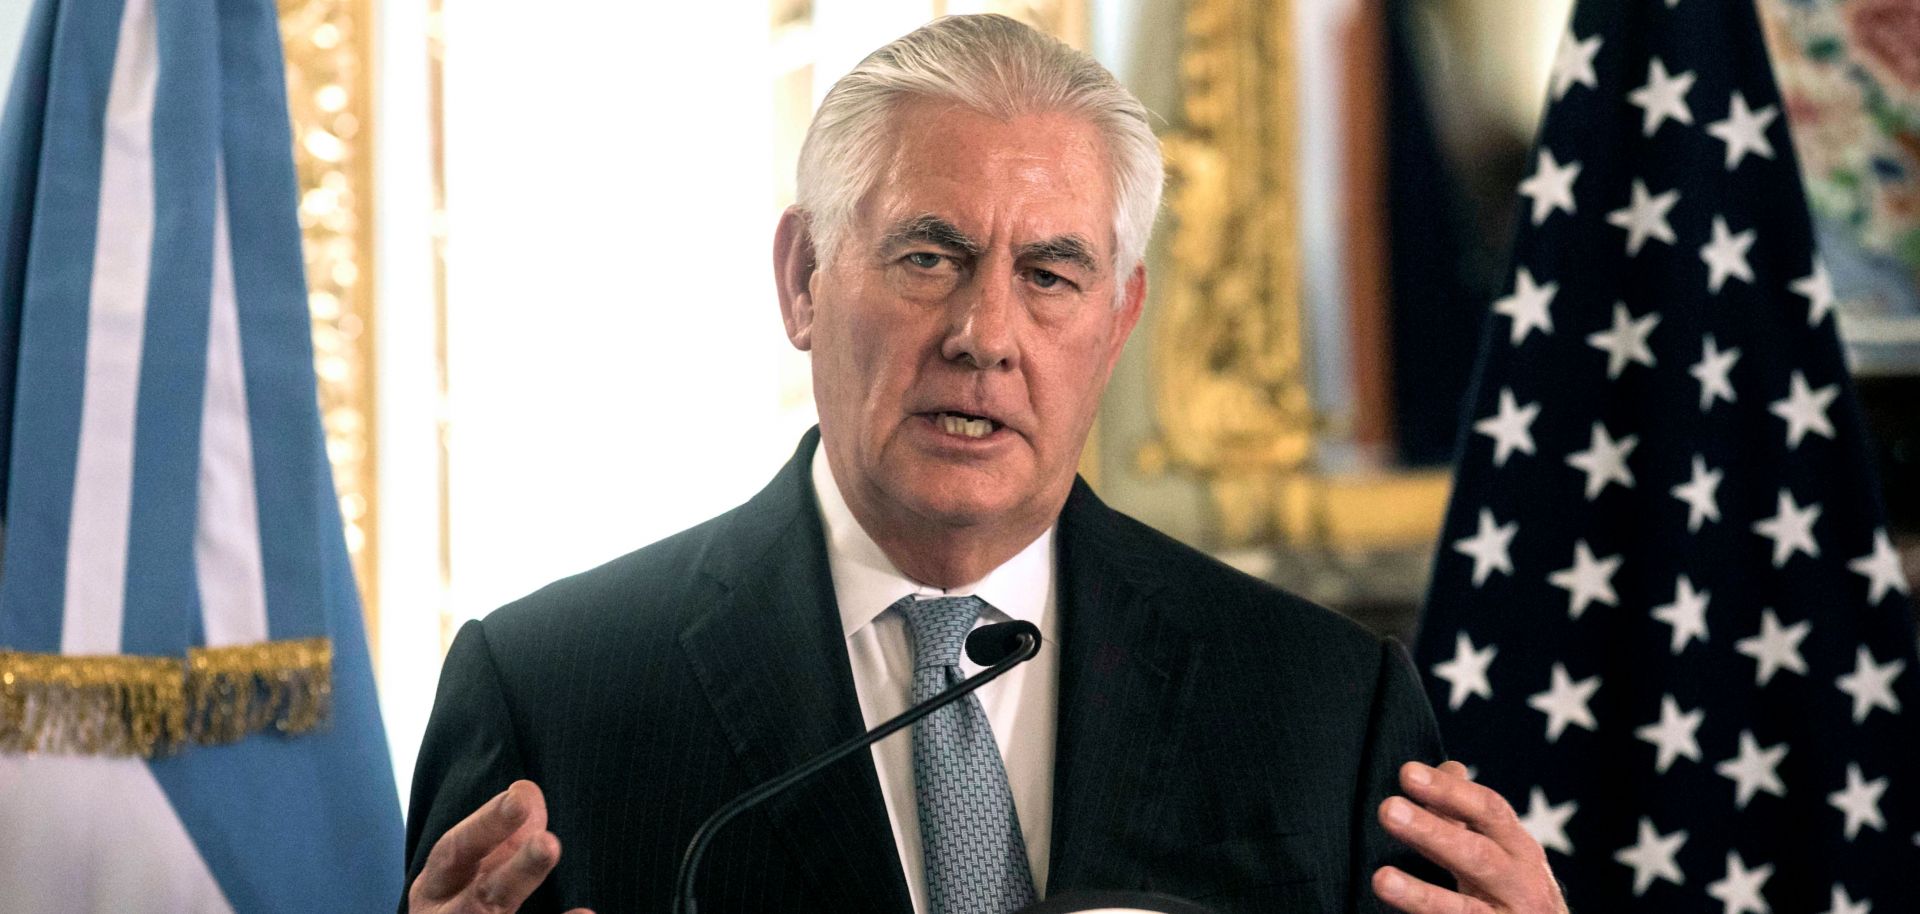 U.S. Secretary of State Rex Tillerson, during a Feb. 4 news conference in Buenos Aires, Argentina.